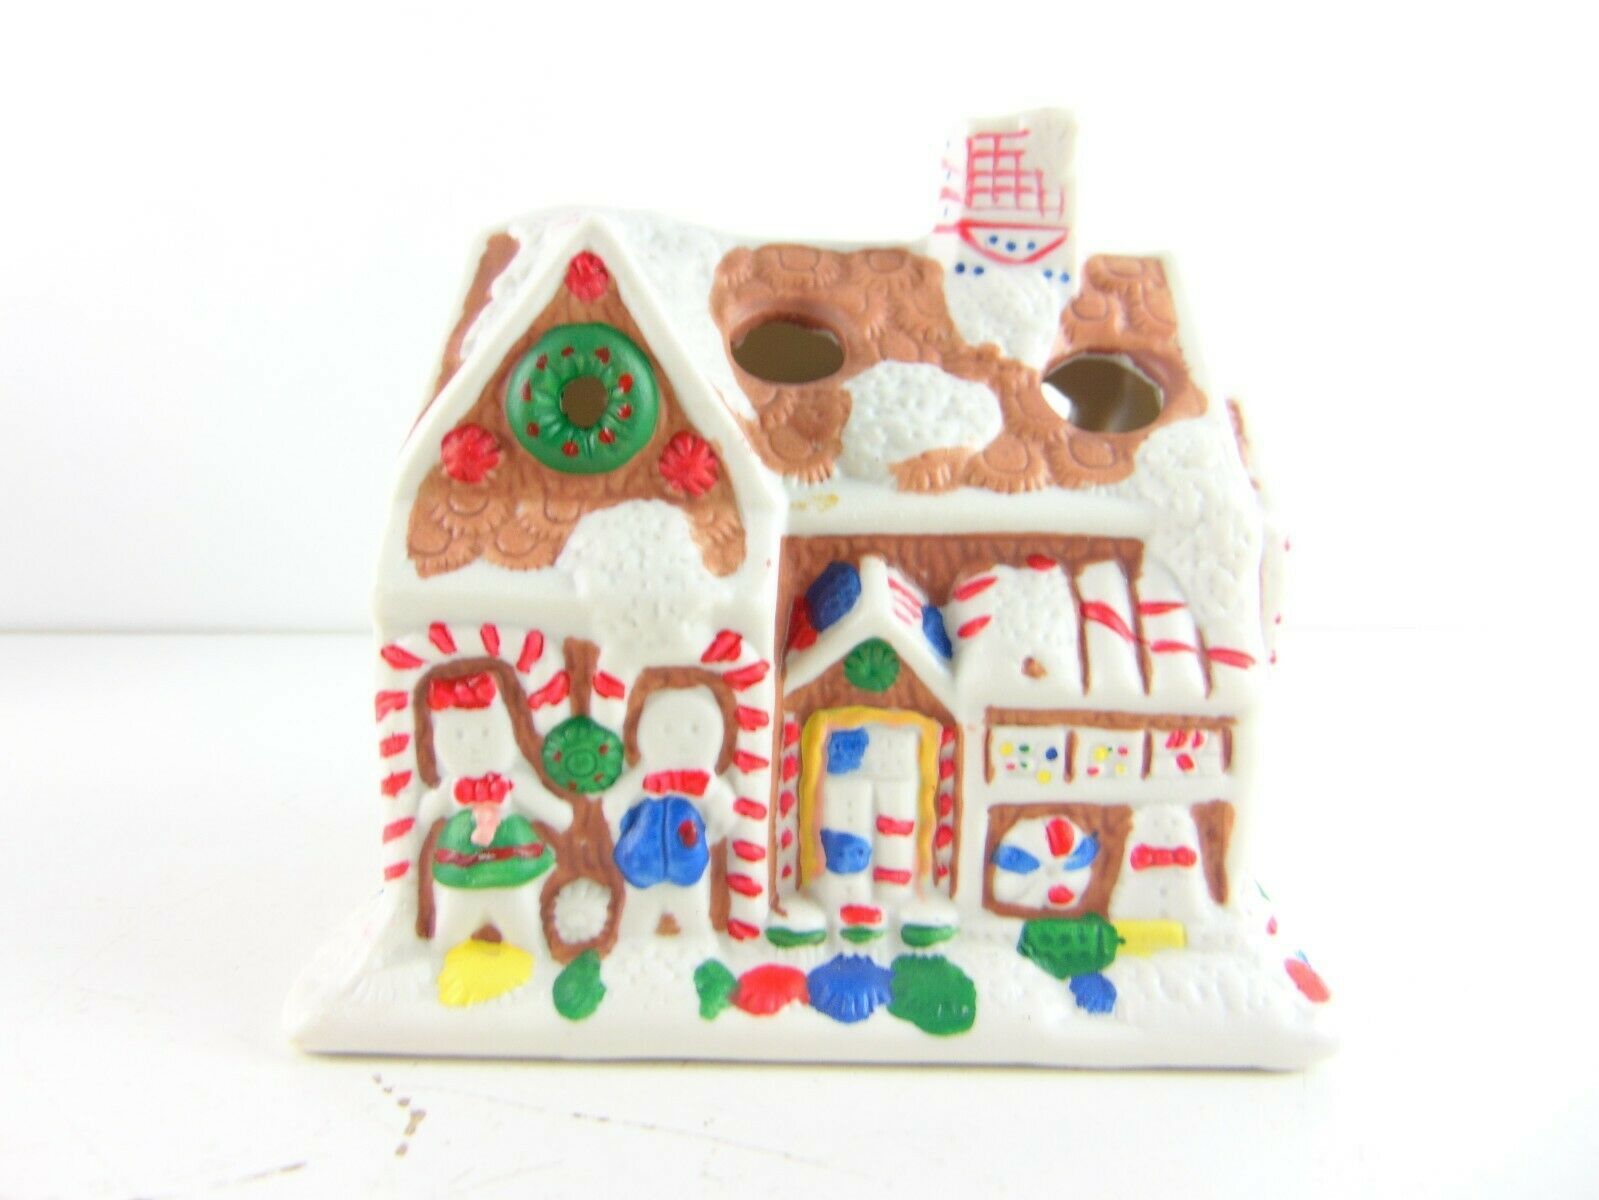 Giftco Ceramic Ginger Bread House - $29.69